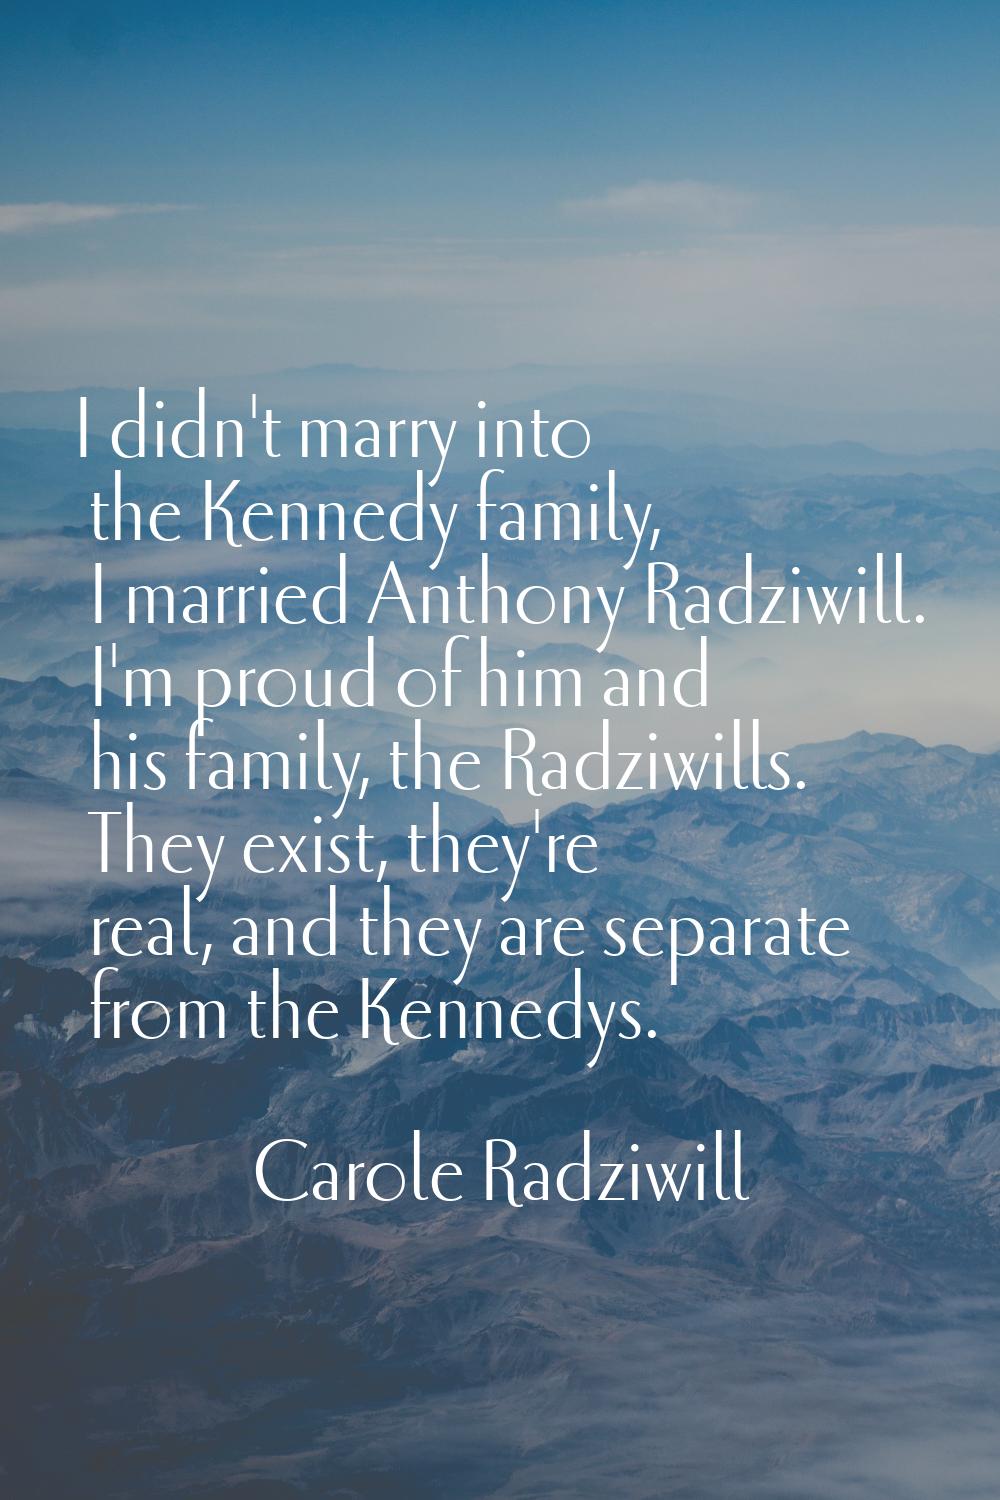 I didn't marry into the Kennedy family, I married Anthony Radziwill. I'm proud of him and his famil